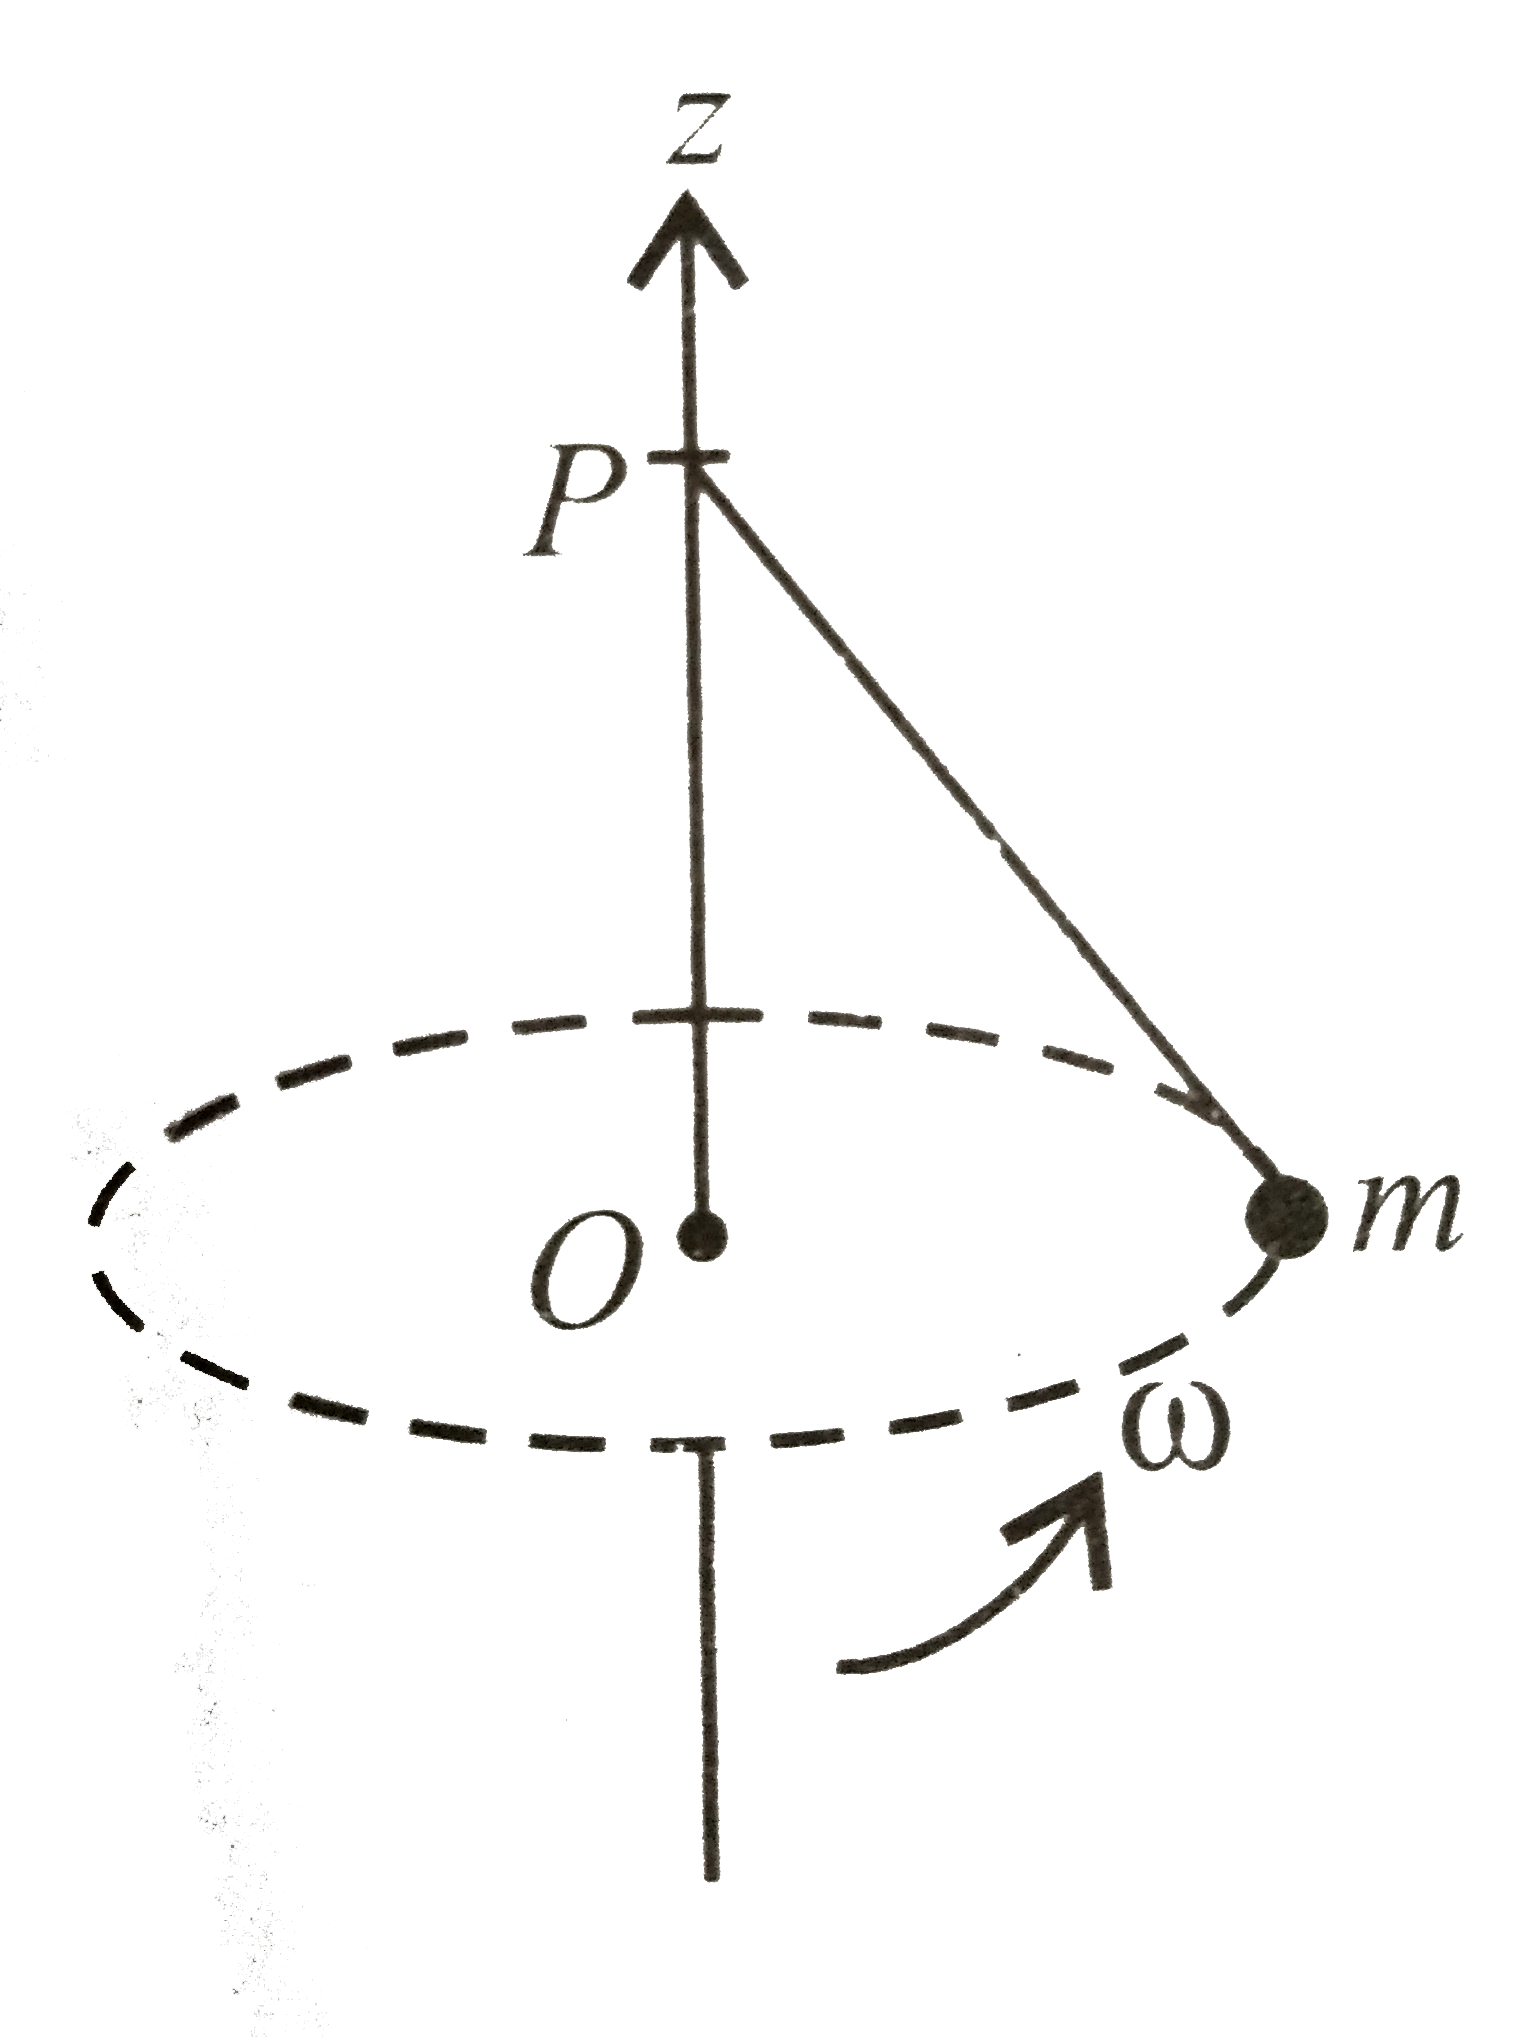 A small mass m is attached to a massless string whose other end is fixed at P as shown in figure. The mass is undergoing circular motion in x-y plane with centre O and constant angular speed omega. If the angular momentum of the system, calculated about O and P and denoted by